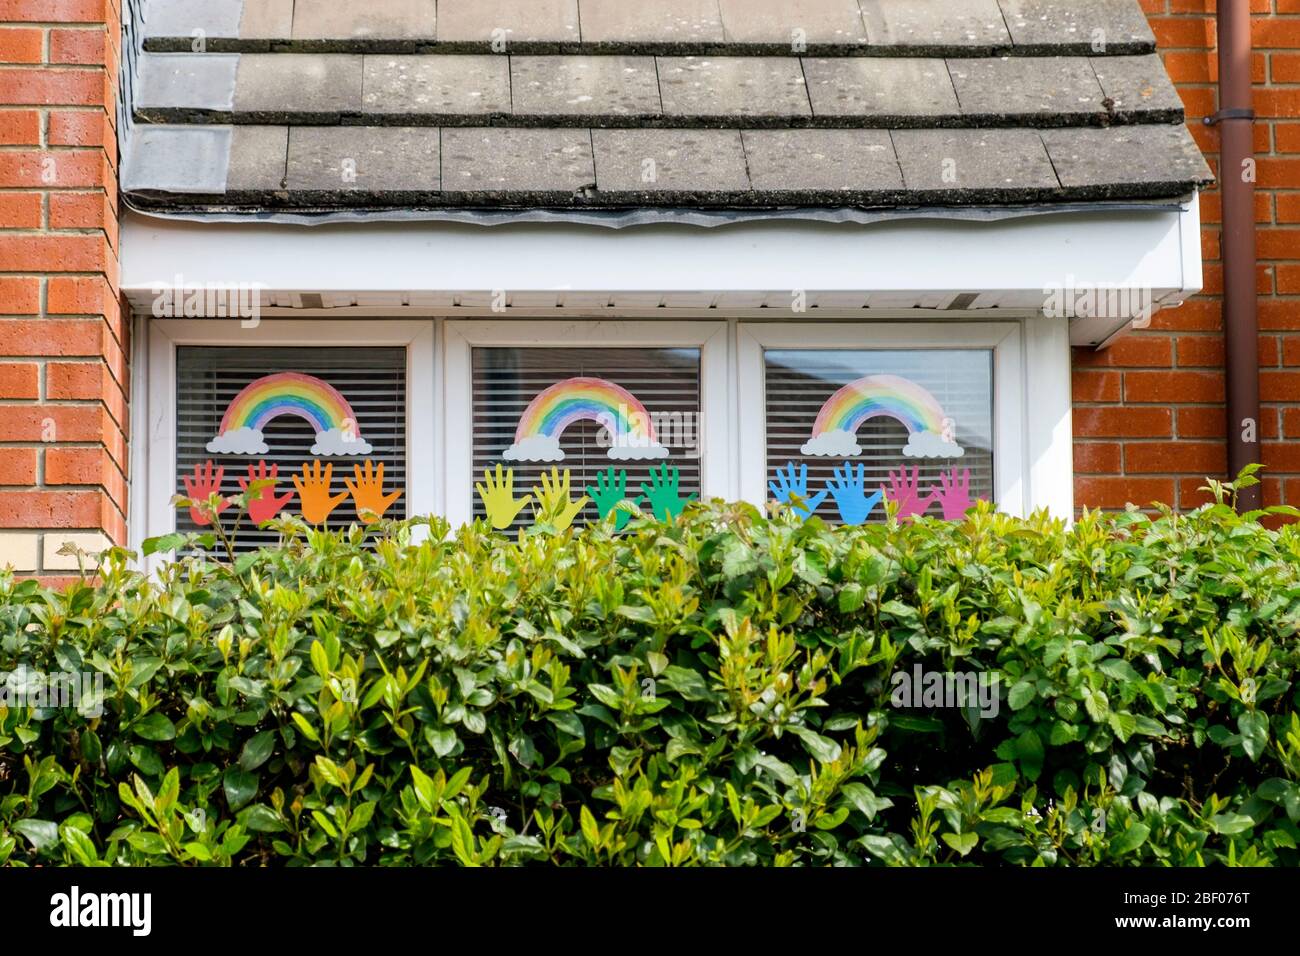 Chippenham, Wiltshire UK, 16th April, 2020. With the nation due to once again clap to show their support for the NHS tonight, a childs rainbow drawings (a symbol of support for people wanting to show solidarity with NHS workers) are pictured in a front window of a home in Chippenham, Wiltshire. Credit: Lynchpics/Alamy Live News Stock Photo